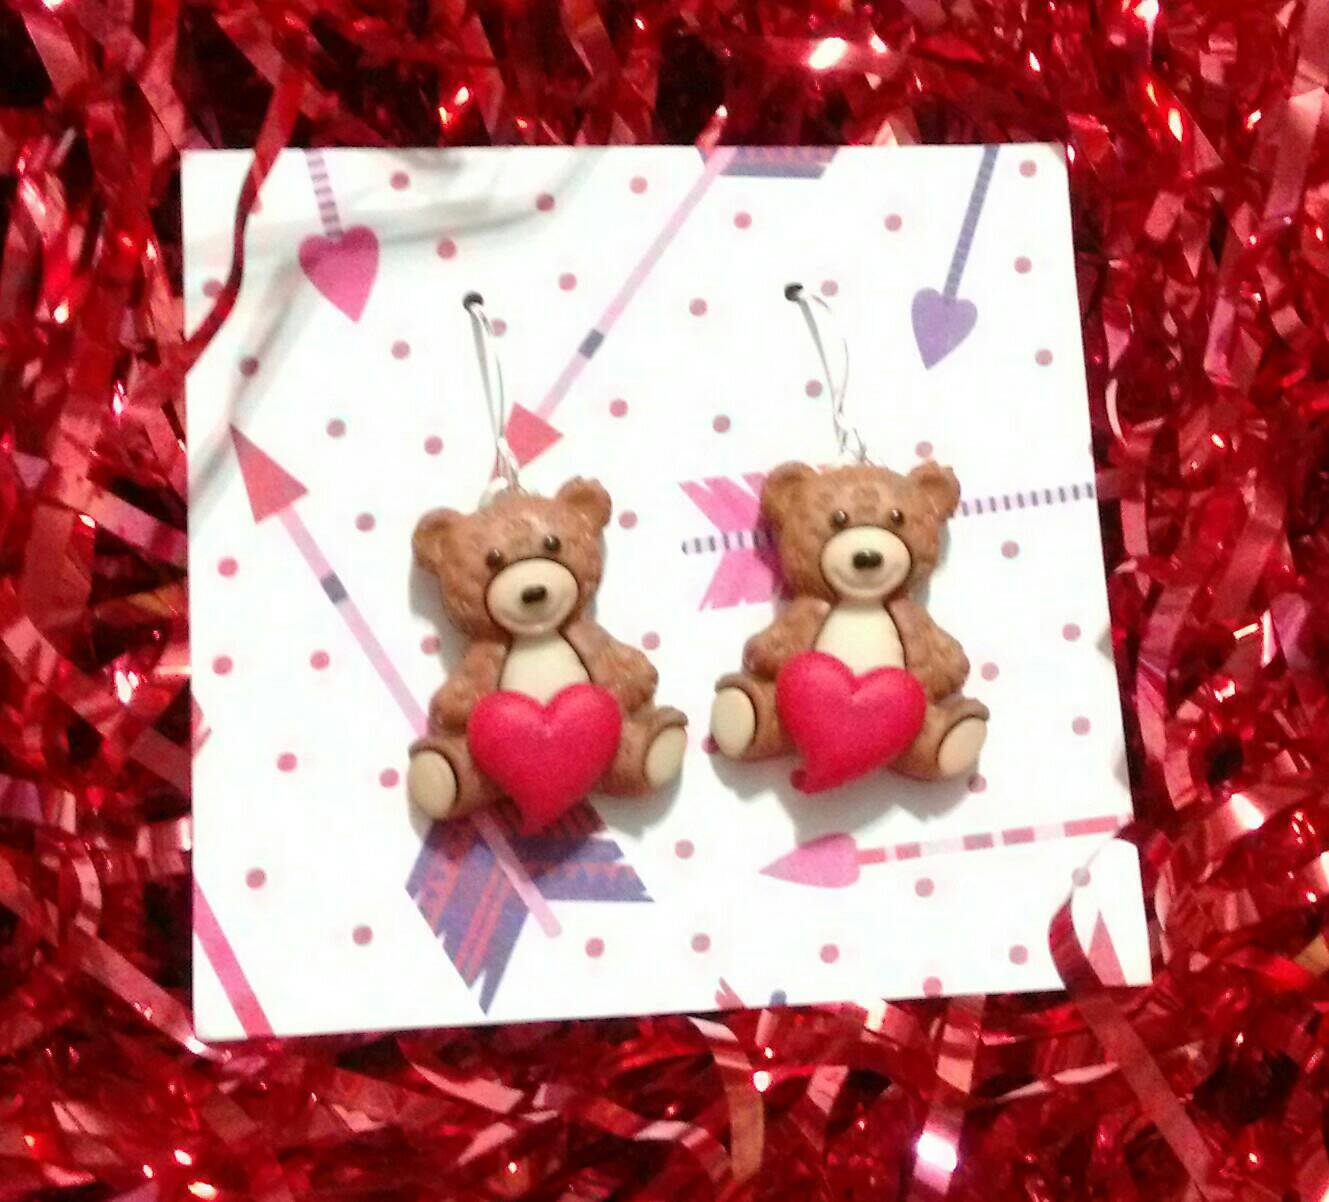 Valentines earrings, Valentines jewelry, bear earrings, valentines hearts, funny earrings, gifts under 10, gifts for her, bear gifts